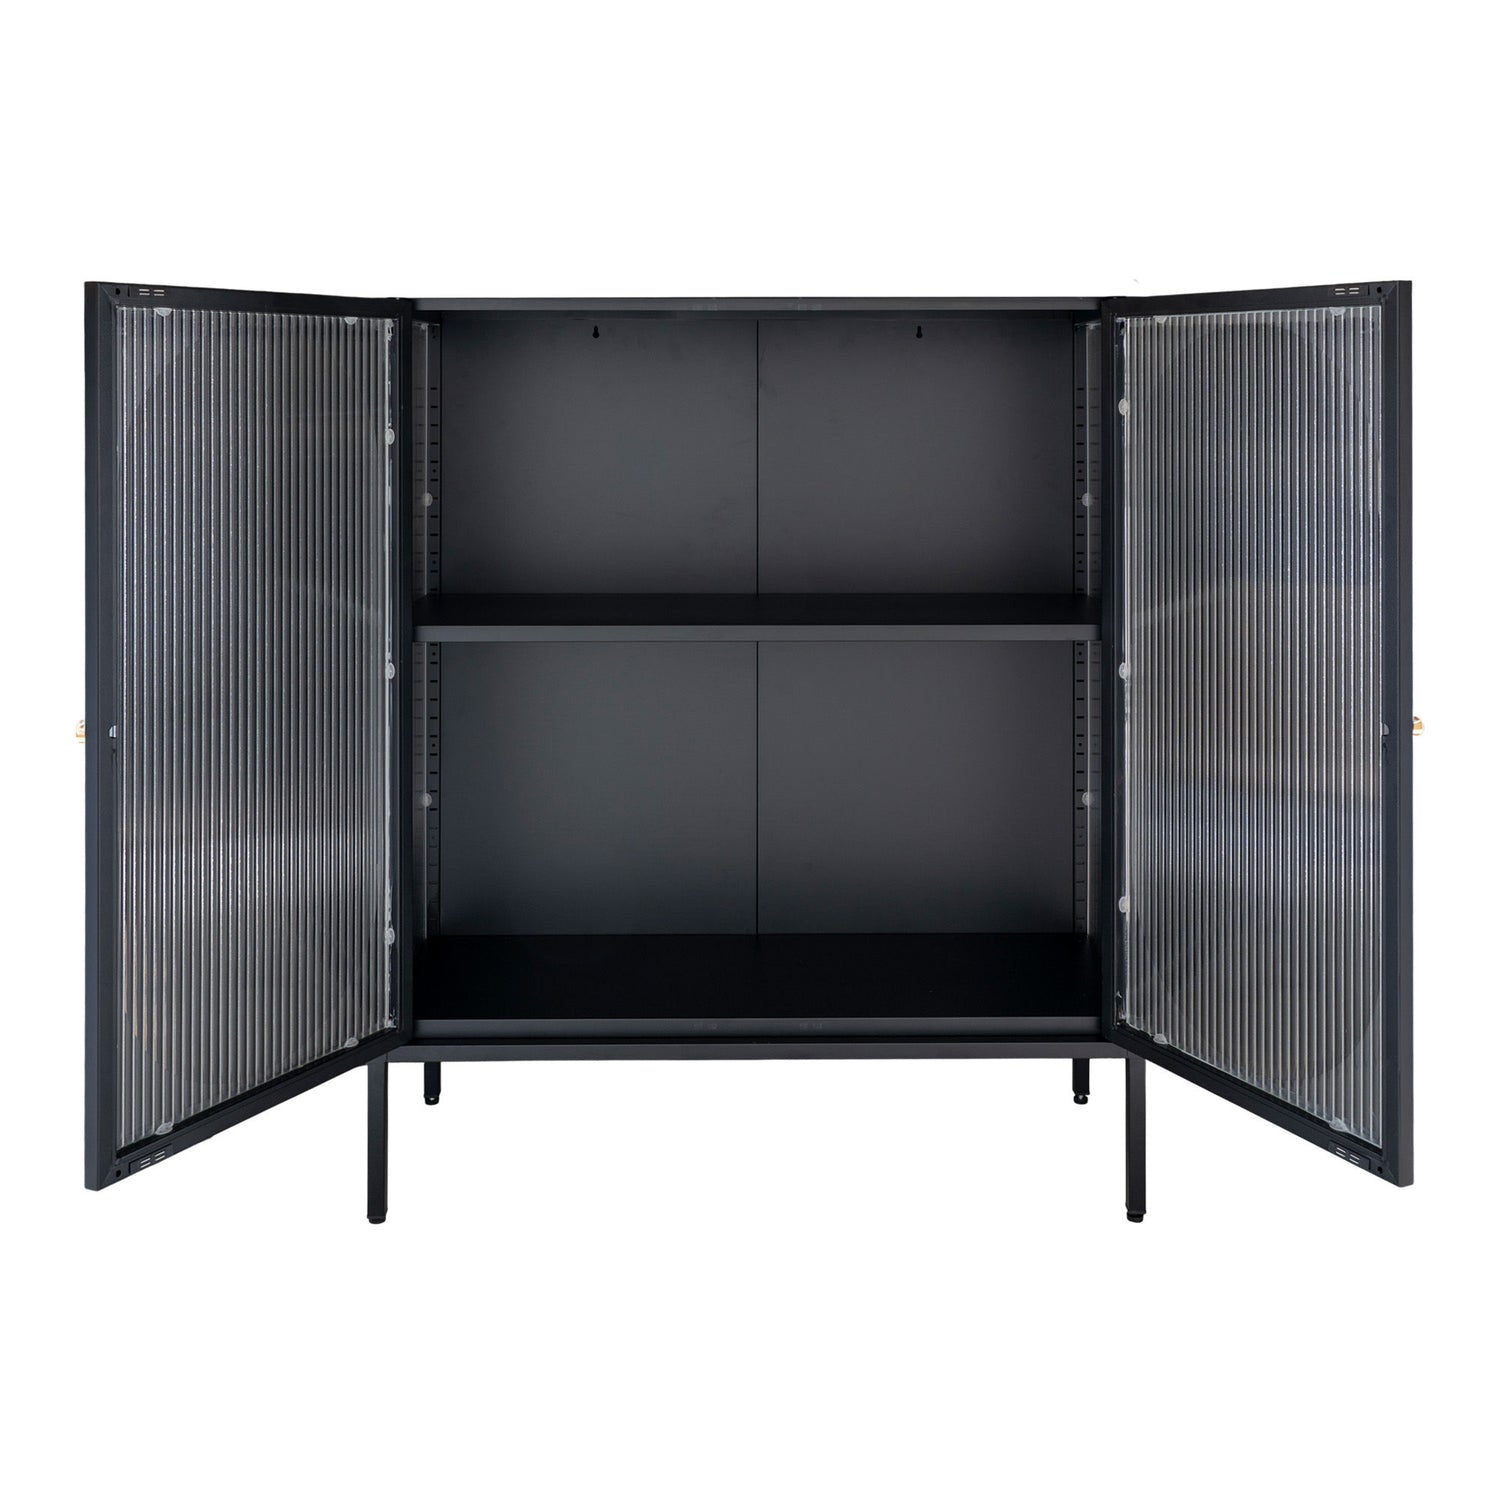 HOUSE NORDIC - Adelaide Display cabinet